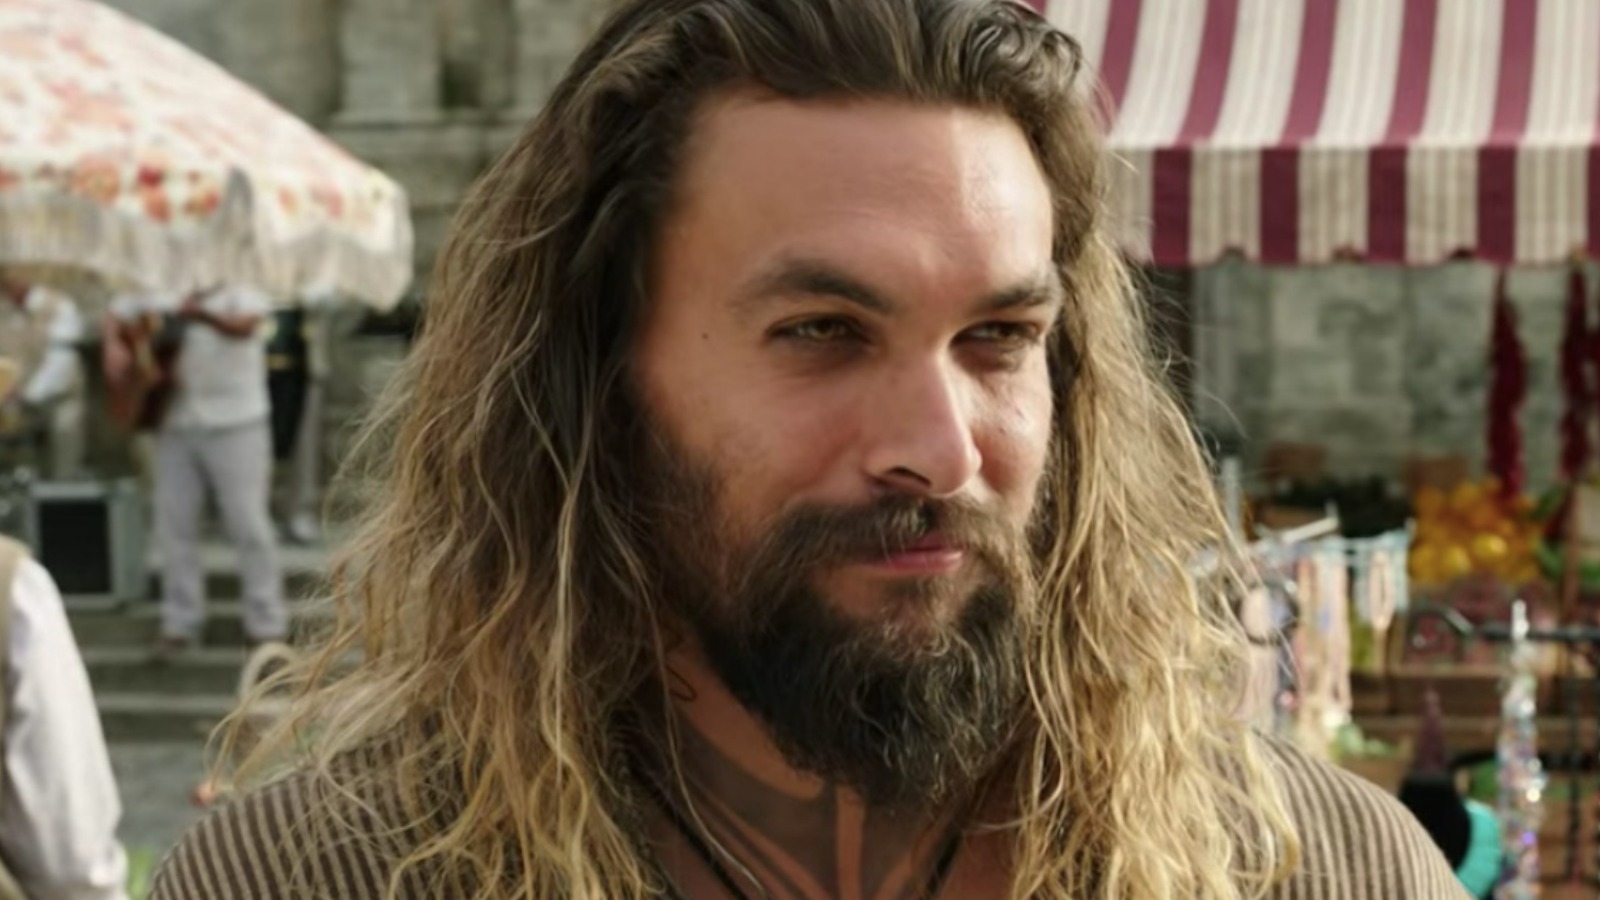 Aquaman 2 Just Hit Another Major Production Milestone